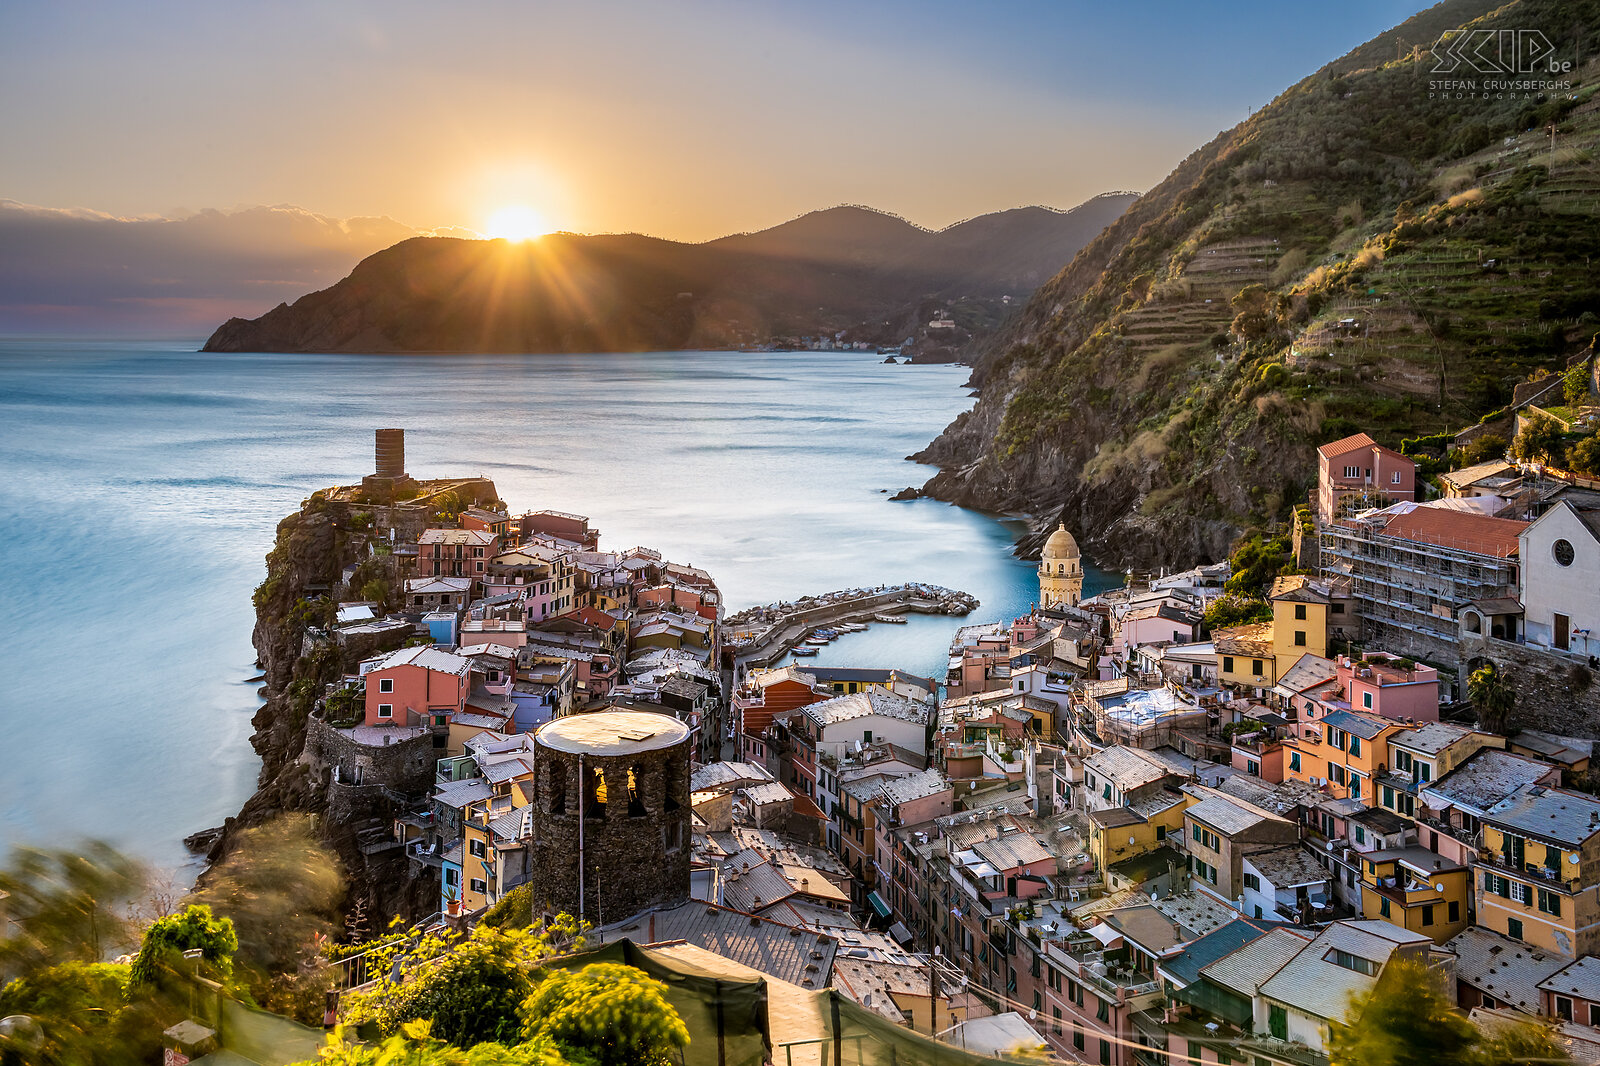 Vernazza - Sunset We also spent a week in Vernazza, a wonderful village belonging to the famous Cinque Terre, the five beautiful villages on the rugged Ligurian coast. The villages are Monterosso al Mare, Vernazza, Corniglia, Riomaggiore and Manarola. Since 1997, these villages are on the UNESCO World Heritage List. The villages are not accessible by car, but only by train, boat or via the footpath that connects the five villages, Via dell'Amore. Stefan Cruysberghs